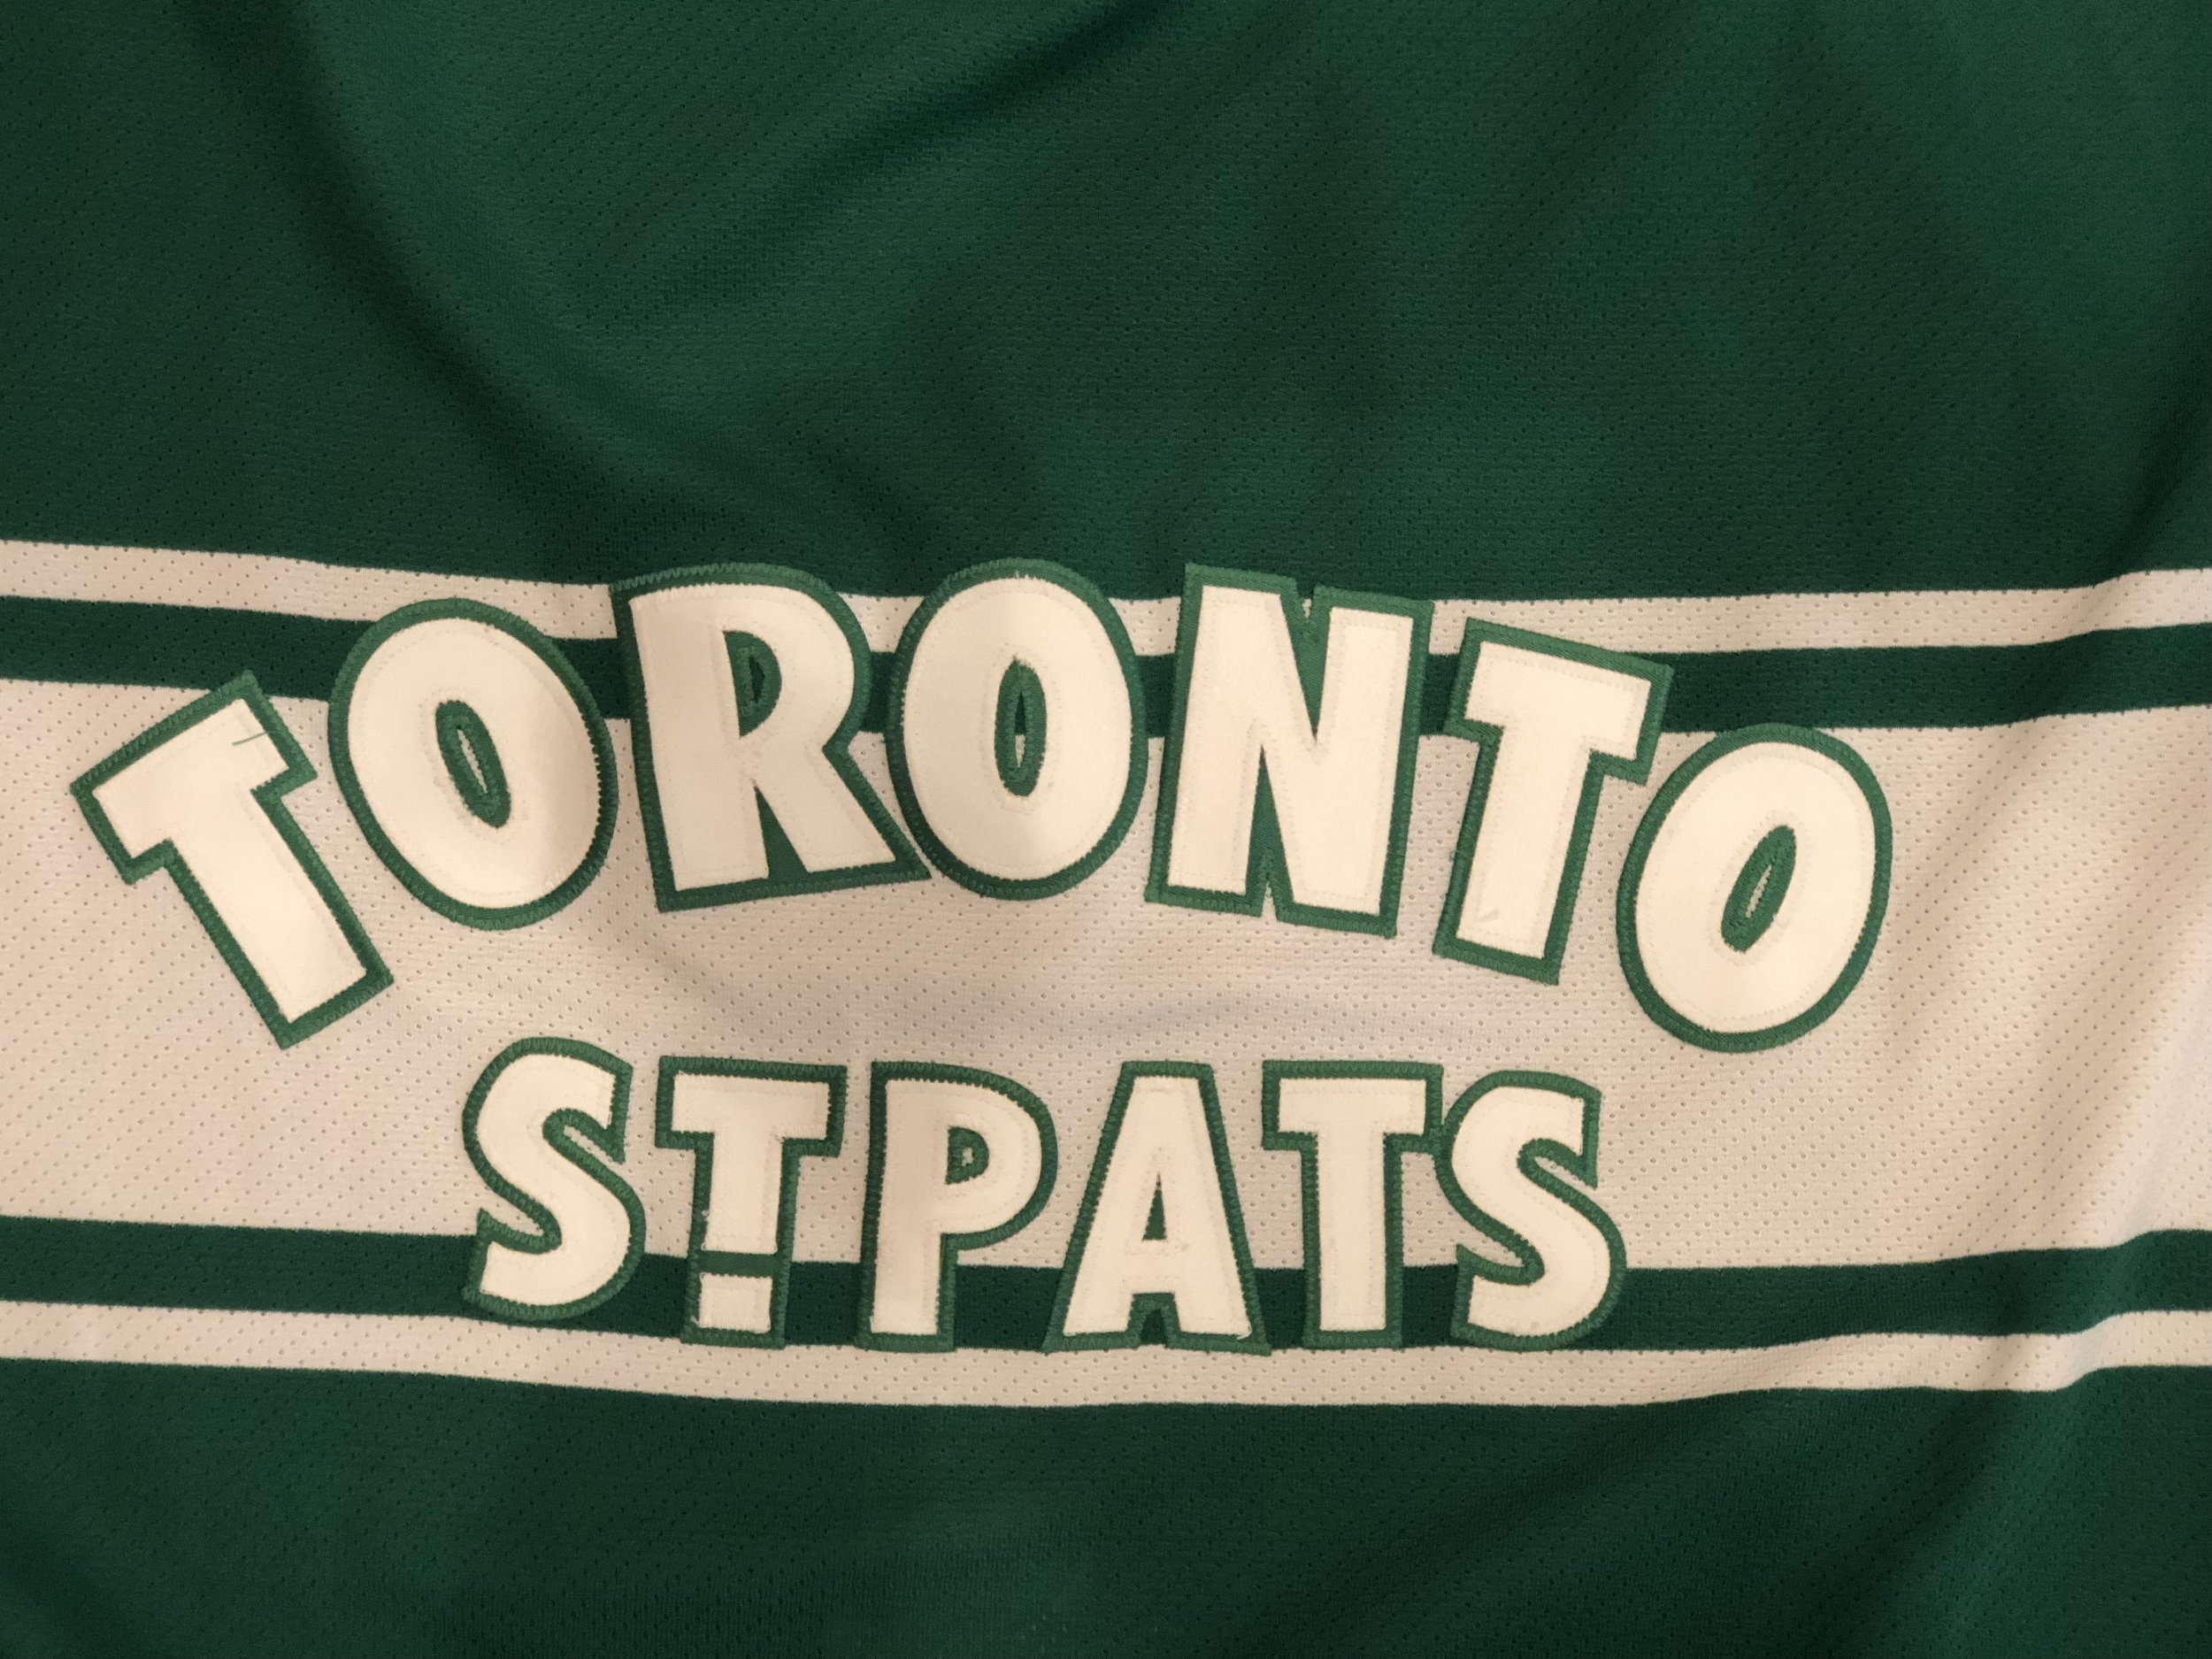 The Leafs are giving away their unused St. Pats jerseys to healthcare  workers - Article - Bardown